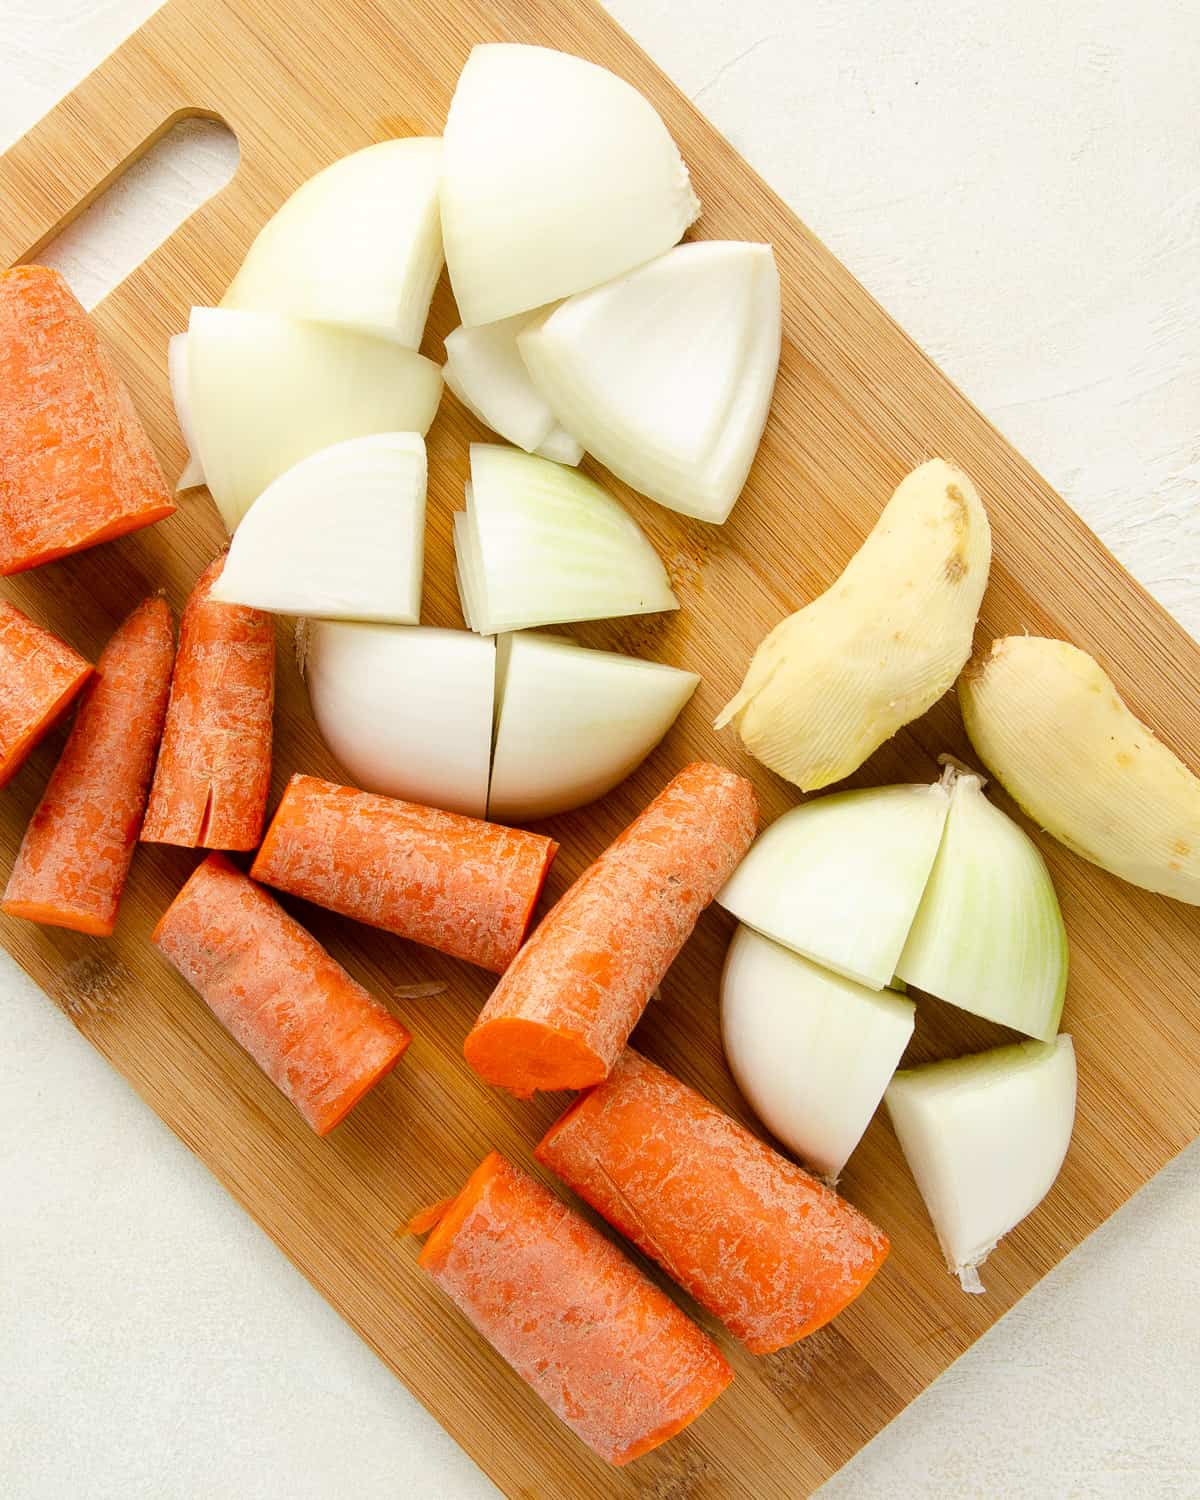 Chop the carrot, onion and ginger root into even cubes for adding flavor to the broth.